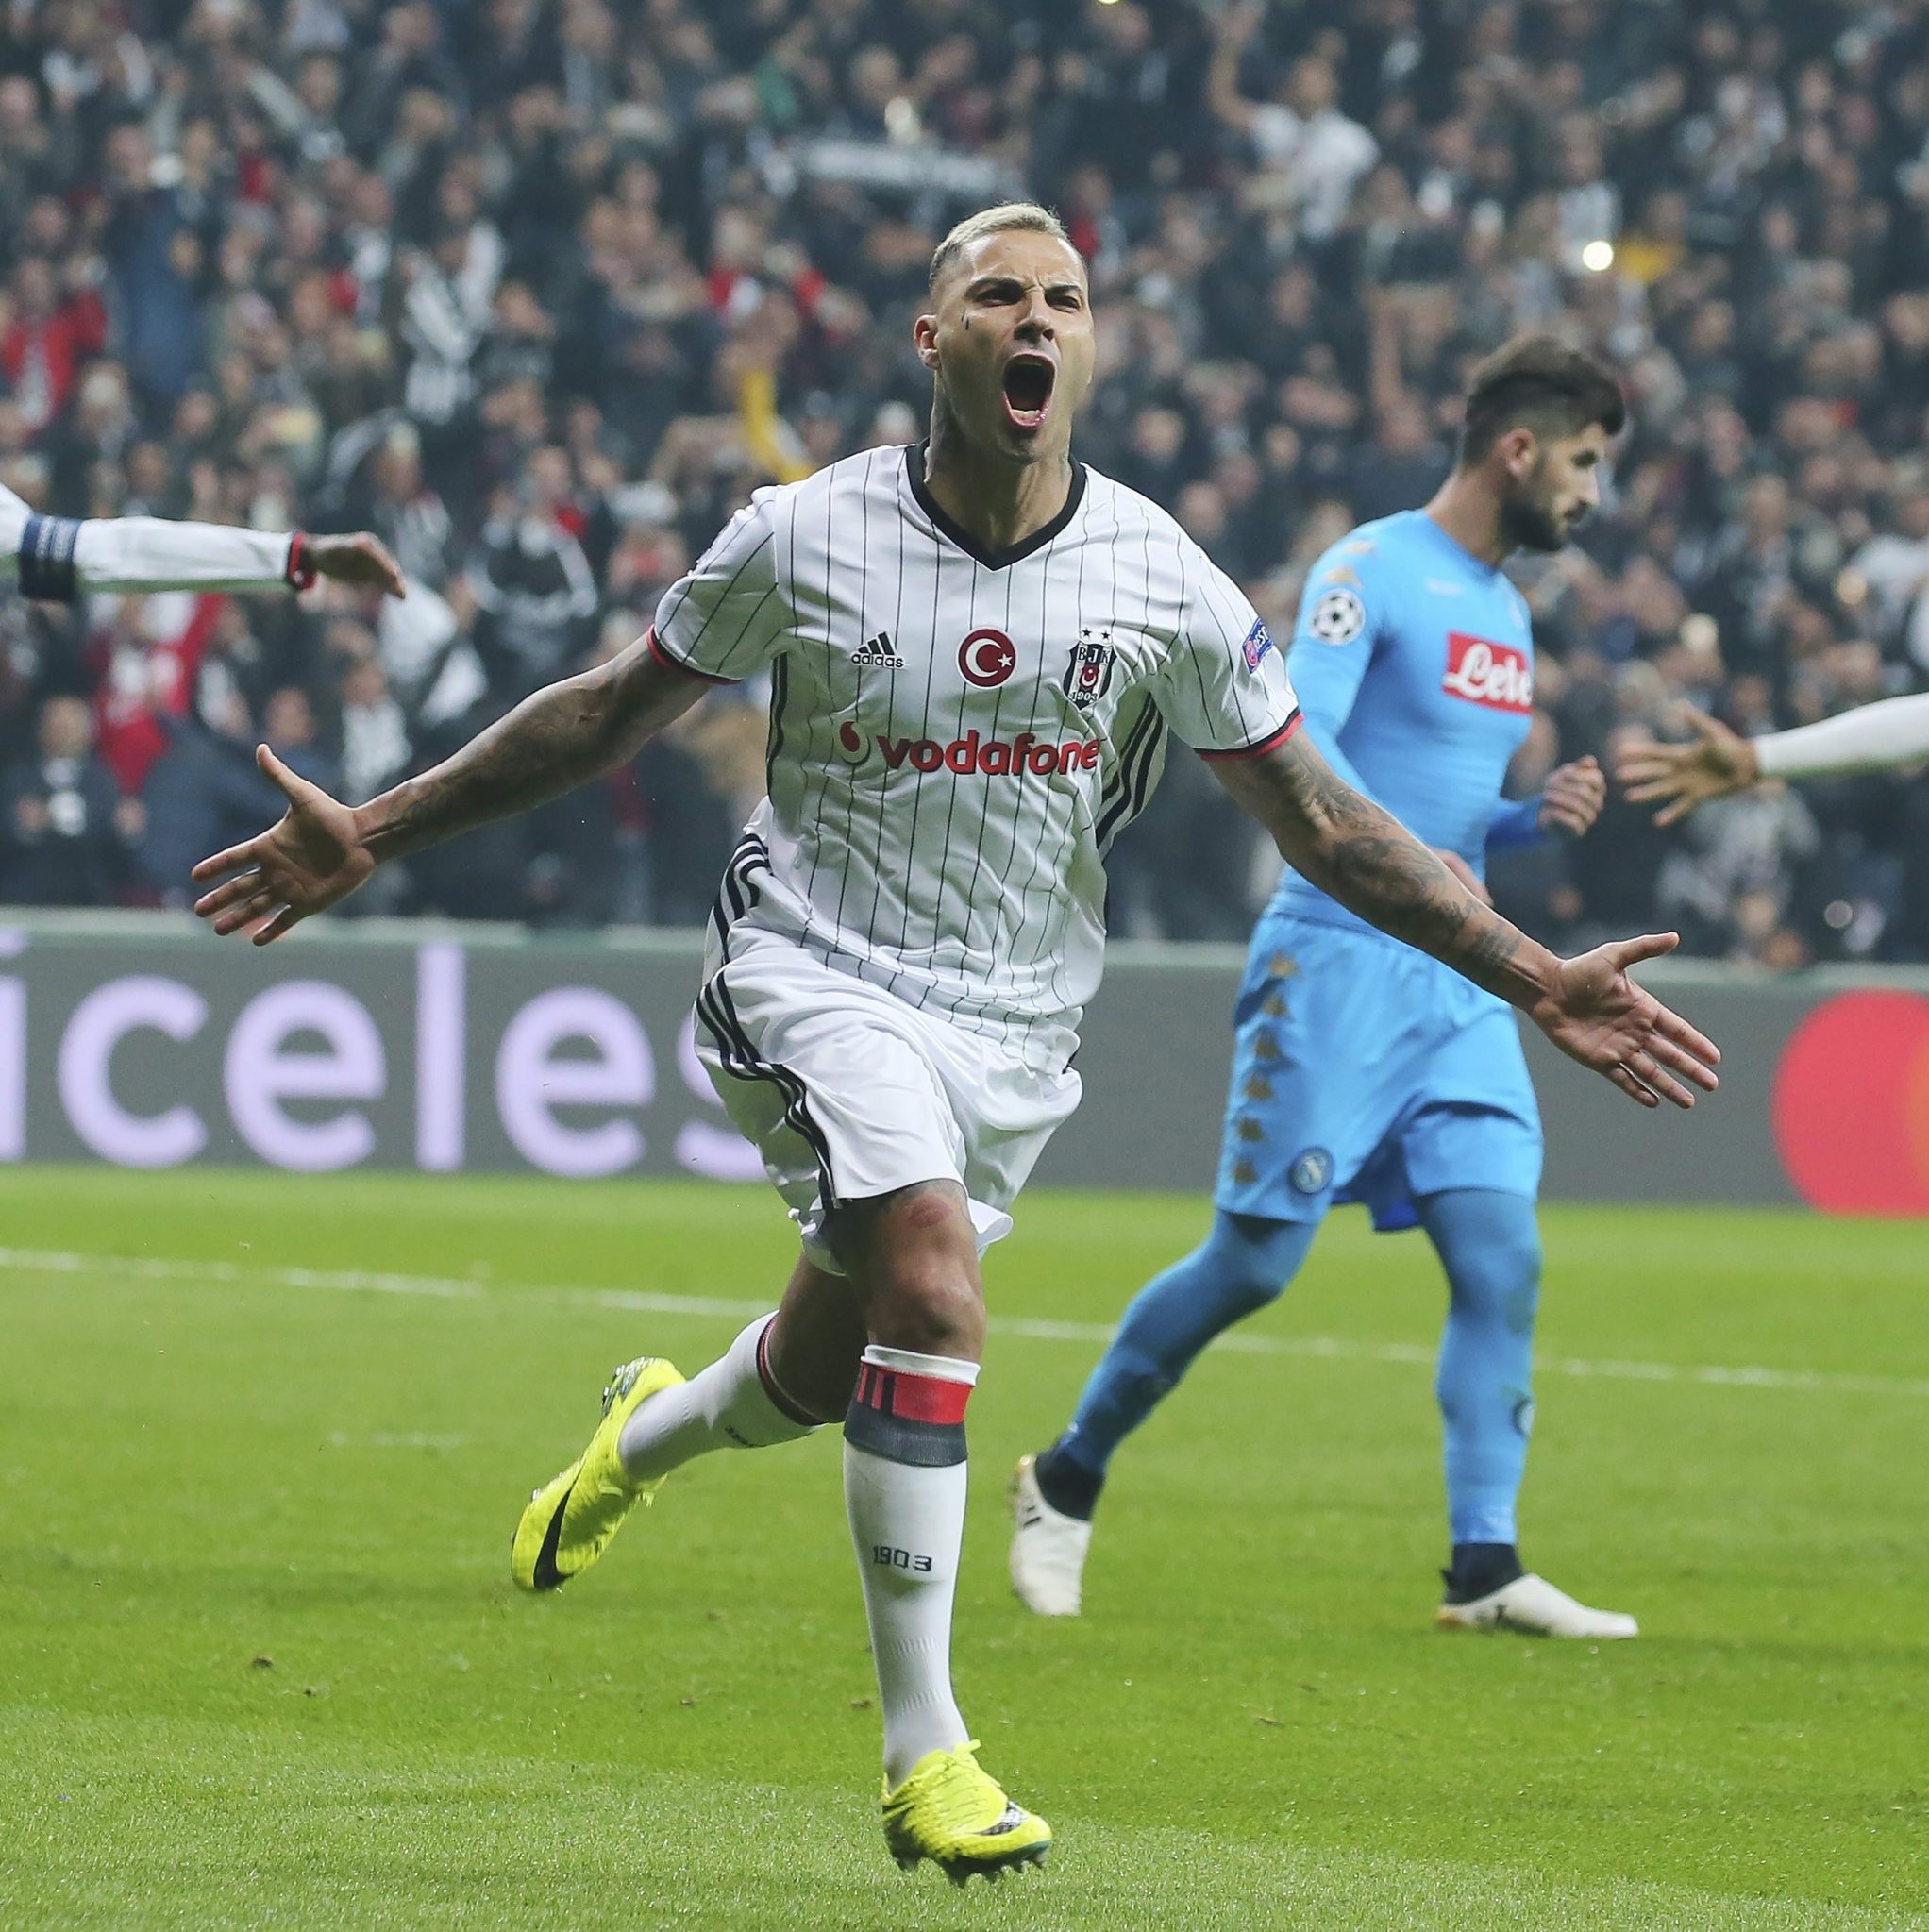 Beu015fiktau015f's Ricardo Quaresma runs to celebrate after scoring against Napoli during their Champions League group B soccer match, in Istanbul, Tuesday, Nov. 1, 2016. (AP Photo)